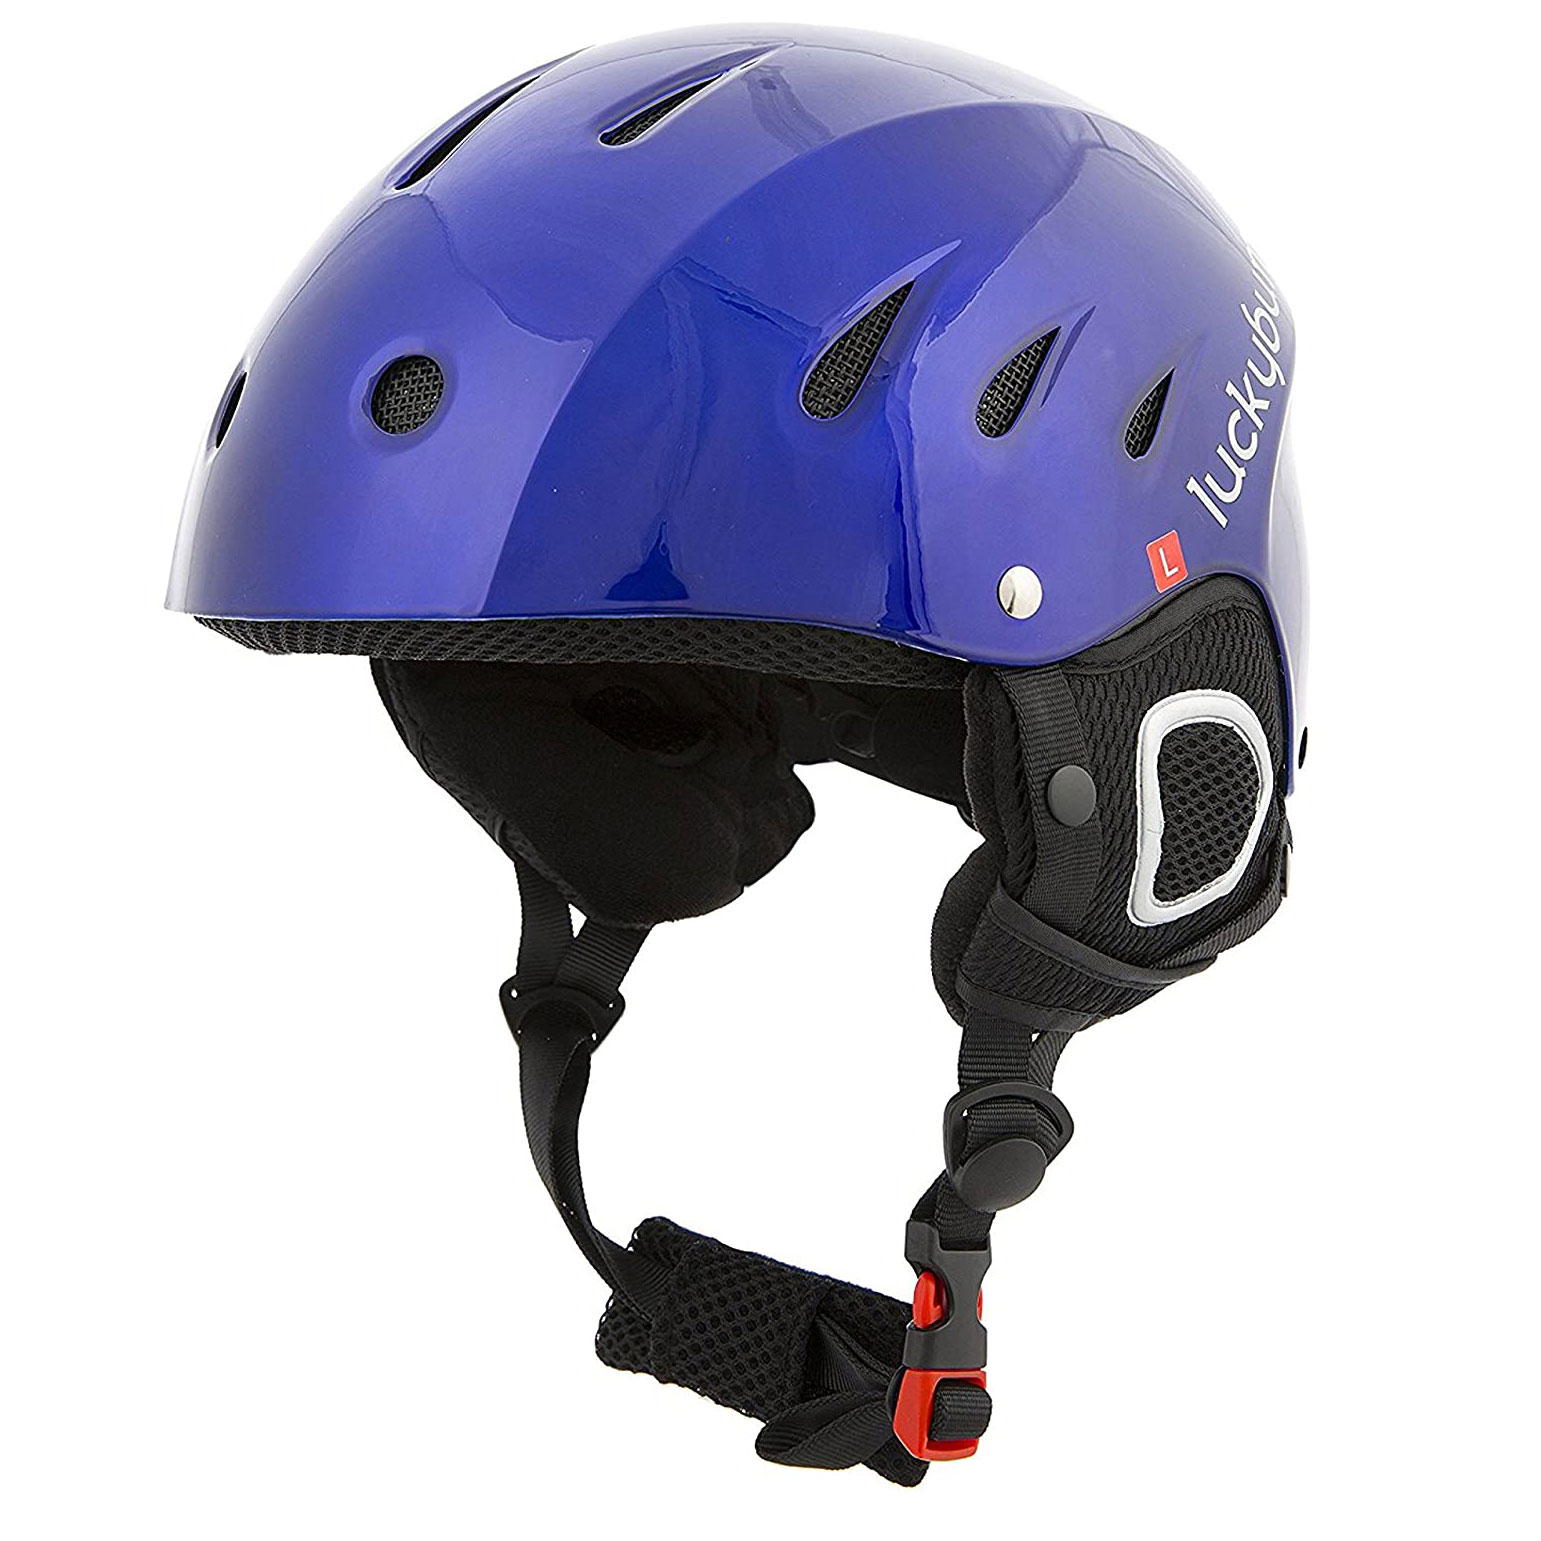 Lucky Bums Snow Sport Helmet, Blue, Large - image 2 of 7